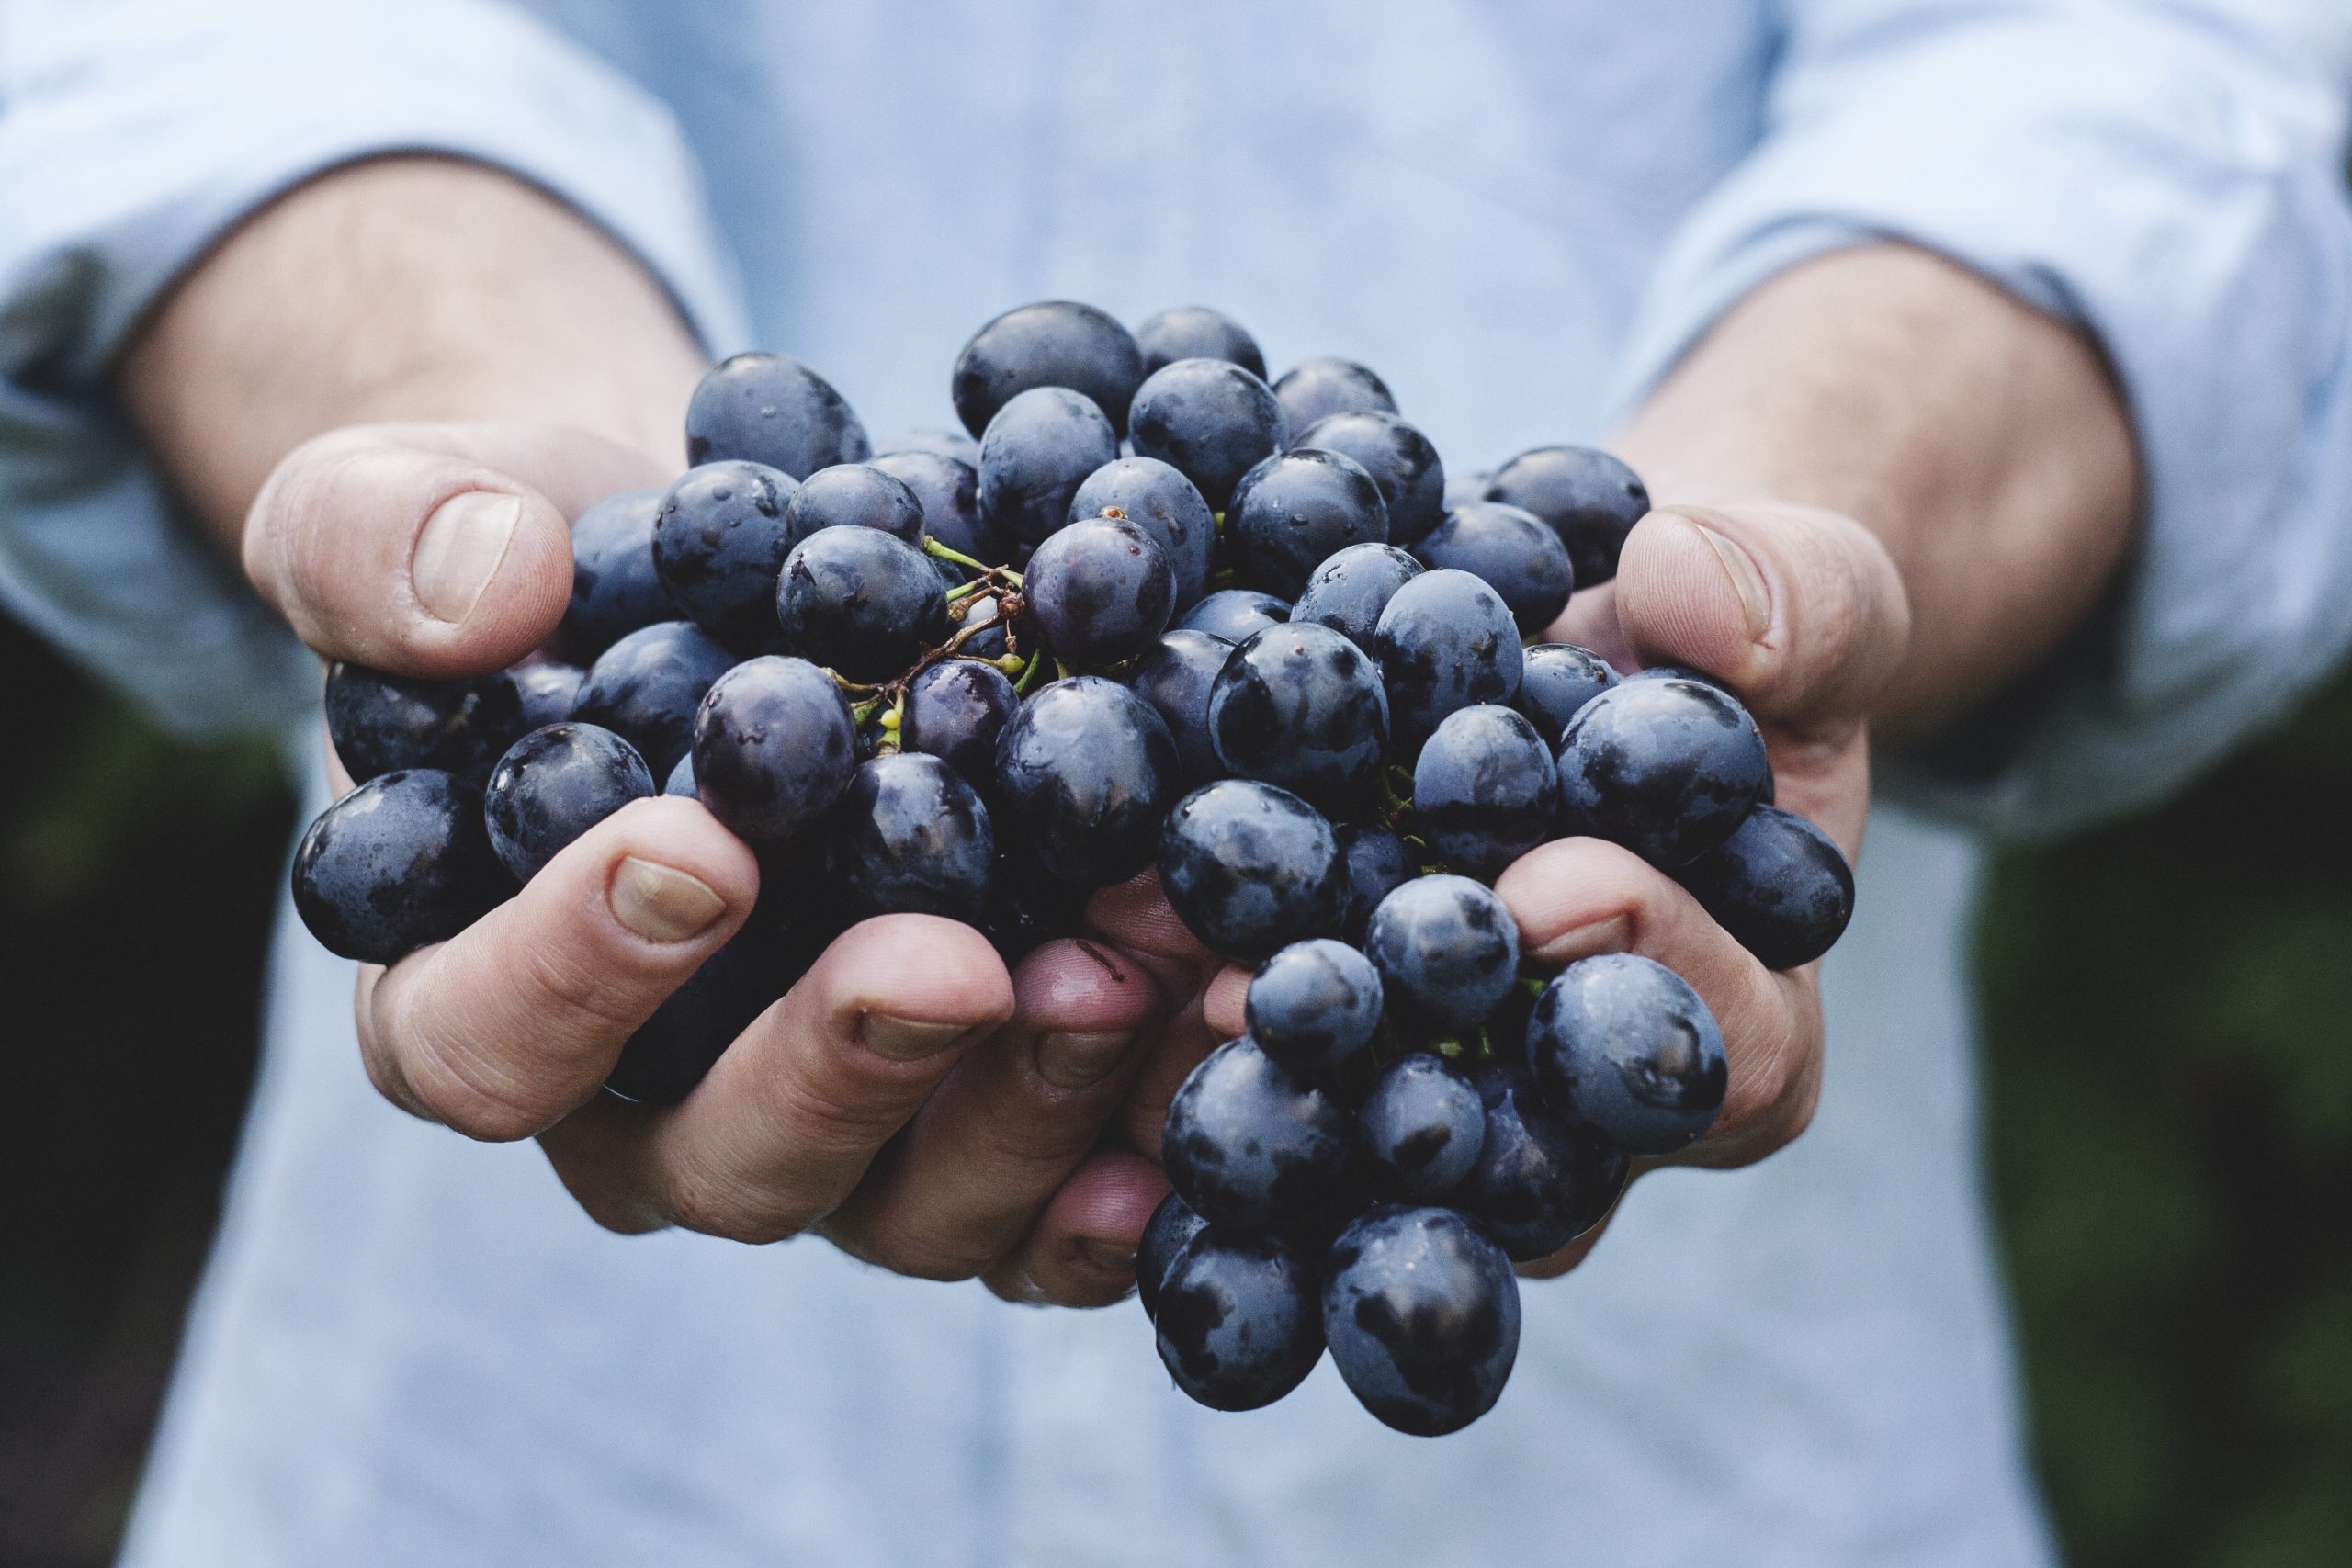 Nielsen figures show that the grape category was worth $2.7 billion in retail sales in the United States in the 52 weeks to May 28 this year, a figure 6.7% higher – equal to  $169.6 million – than that for the same period a year ago.